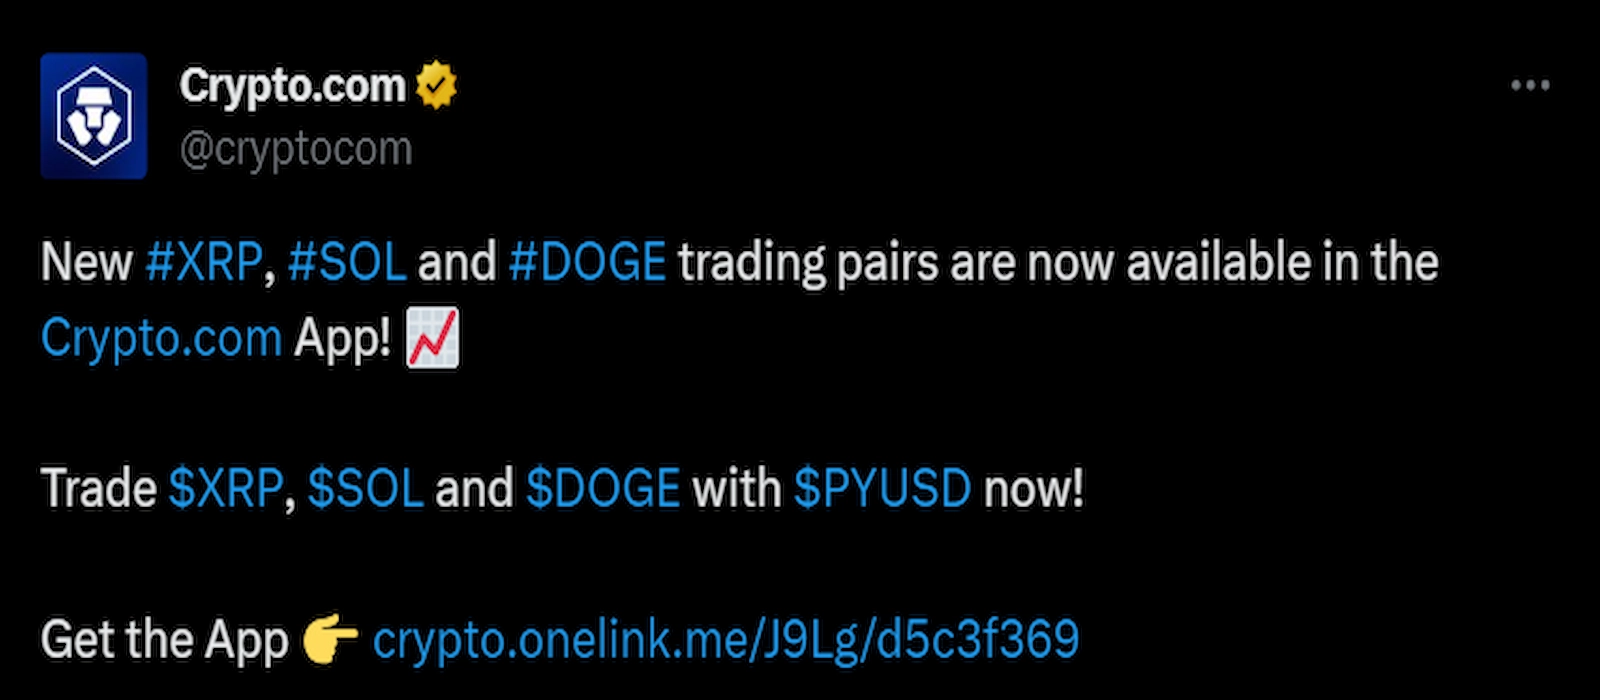 Crypto.com listed the DOGE/PYUSD trading pair